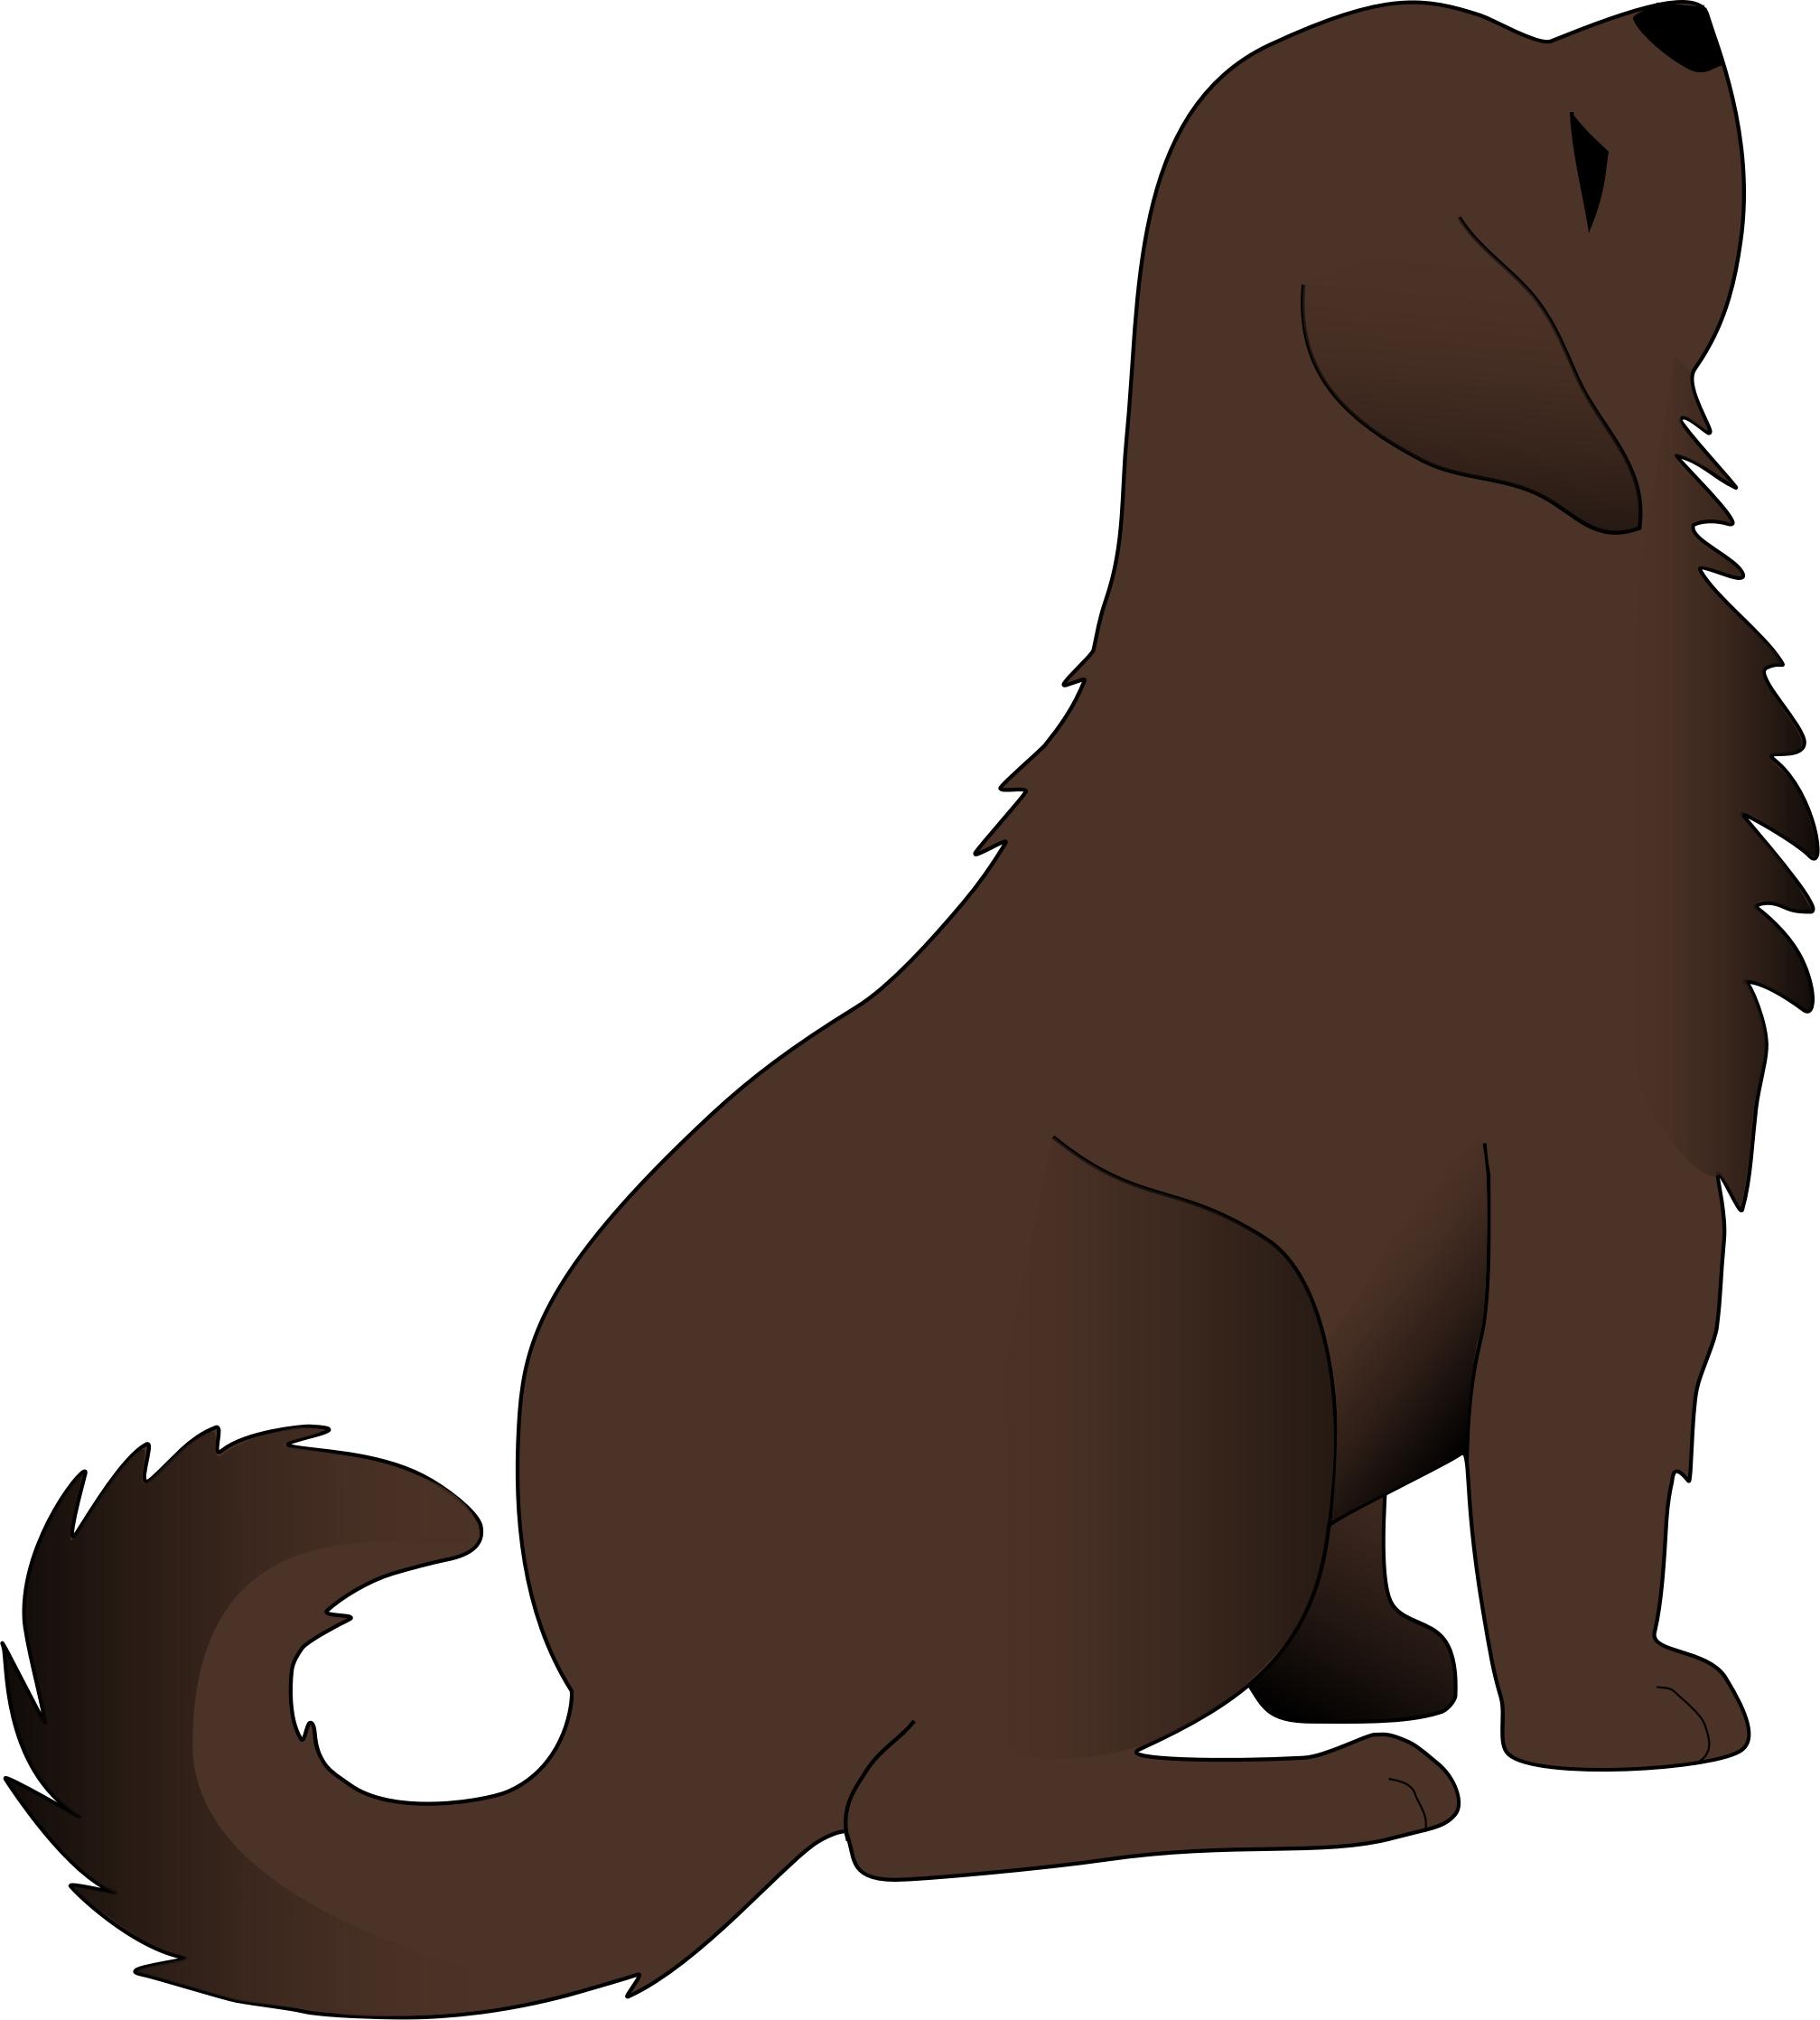 Brown dog PNG icons